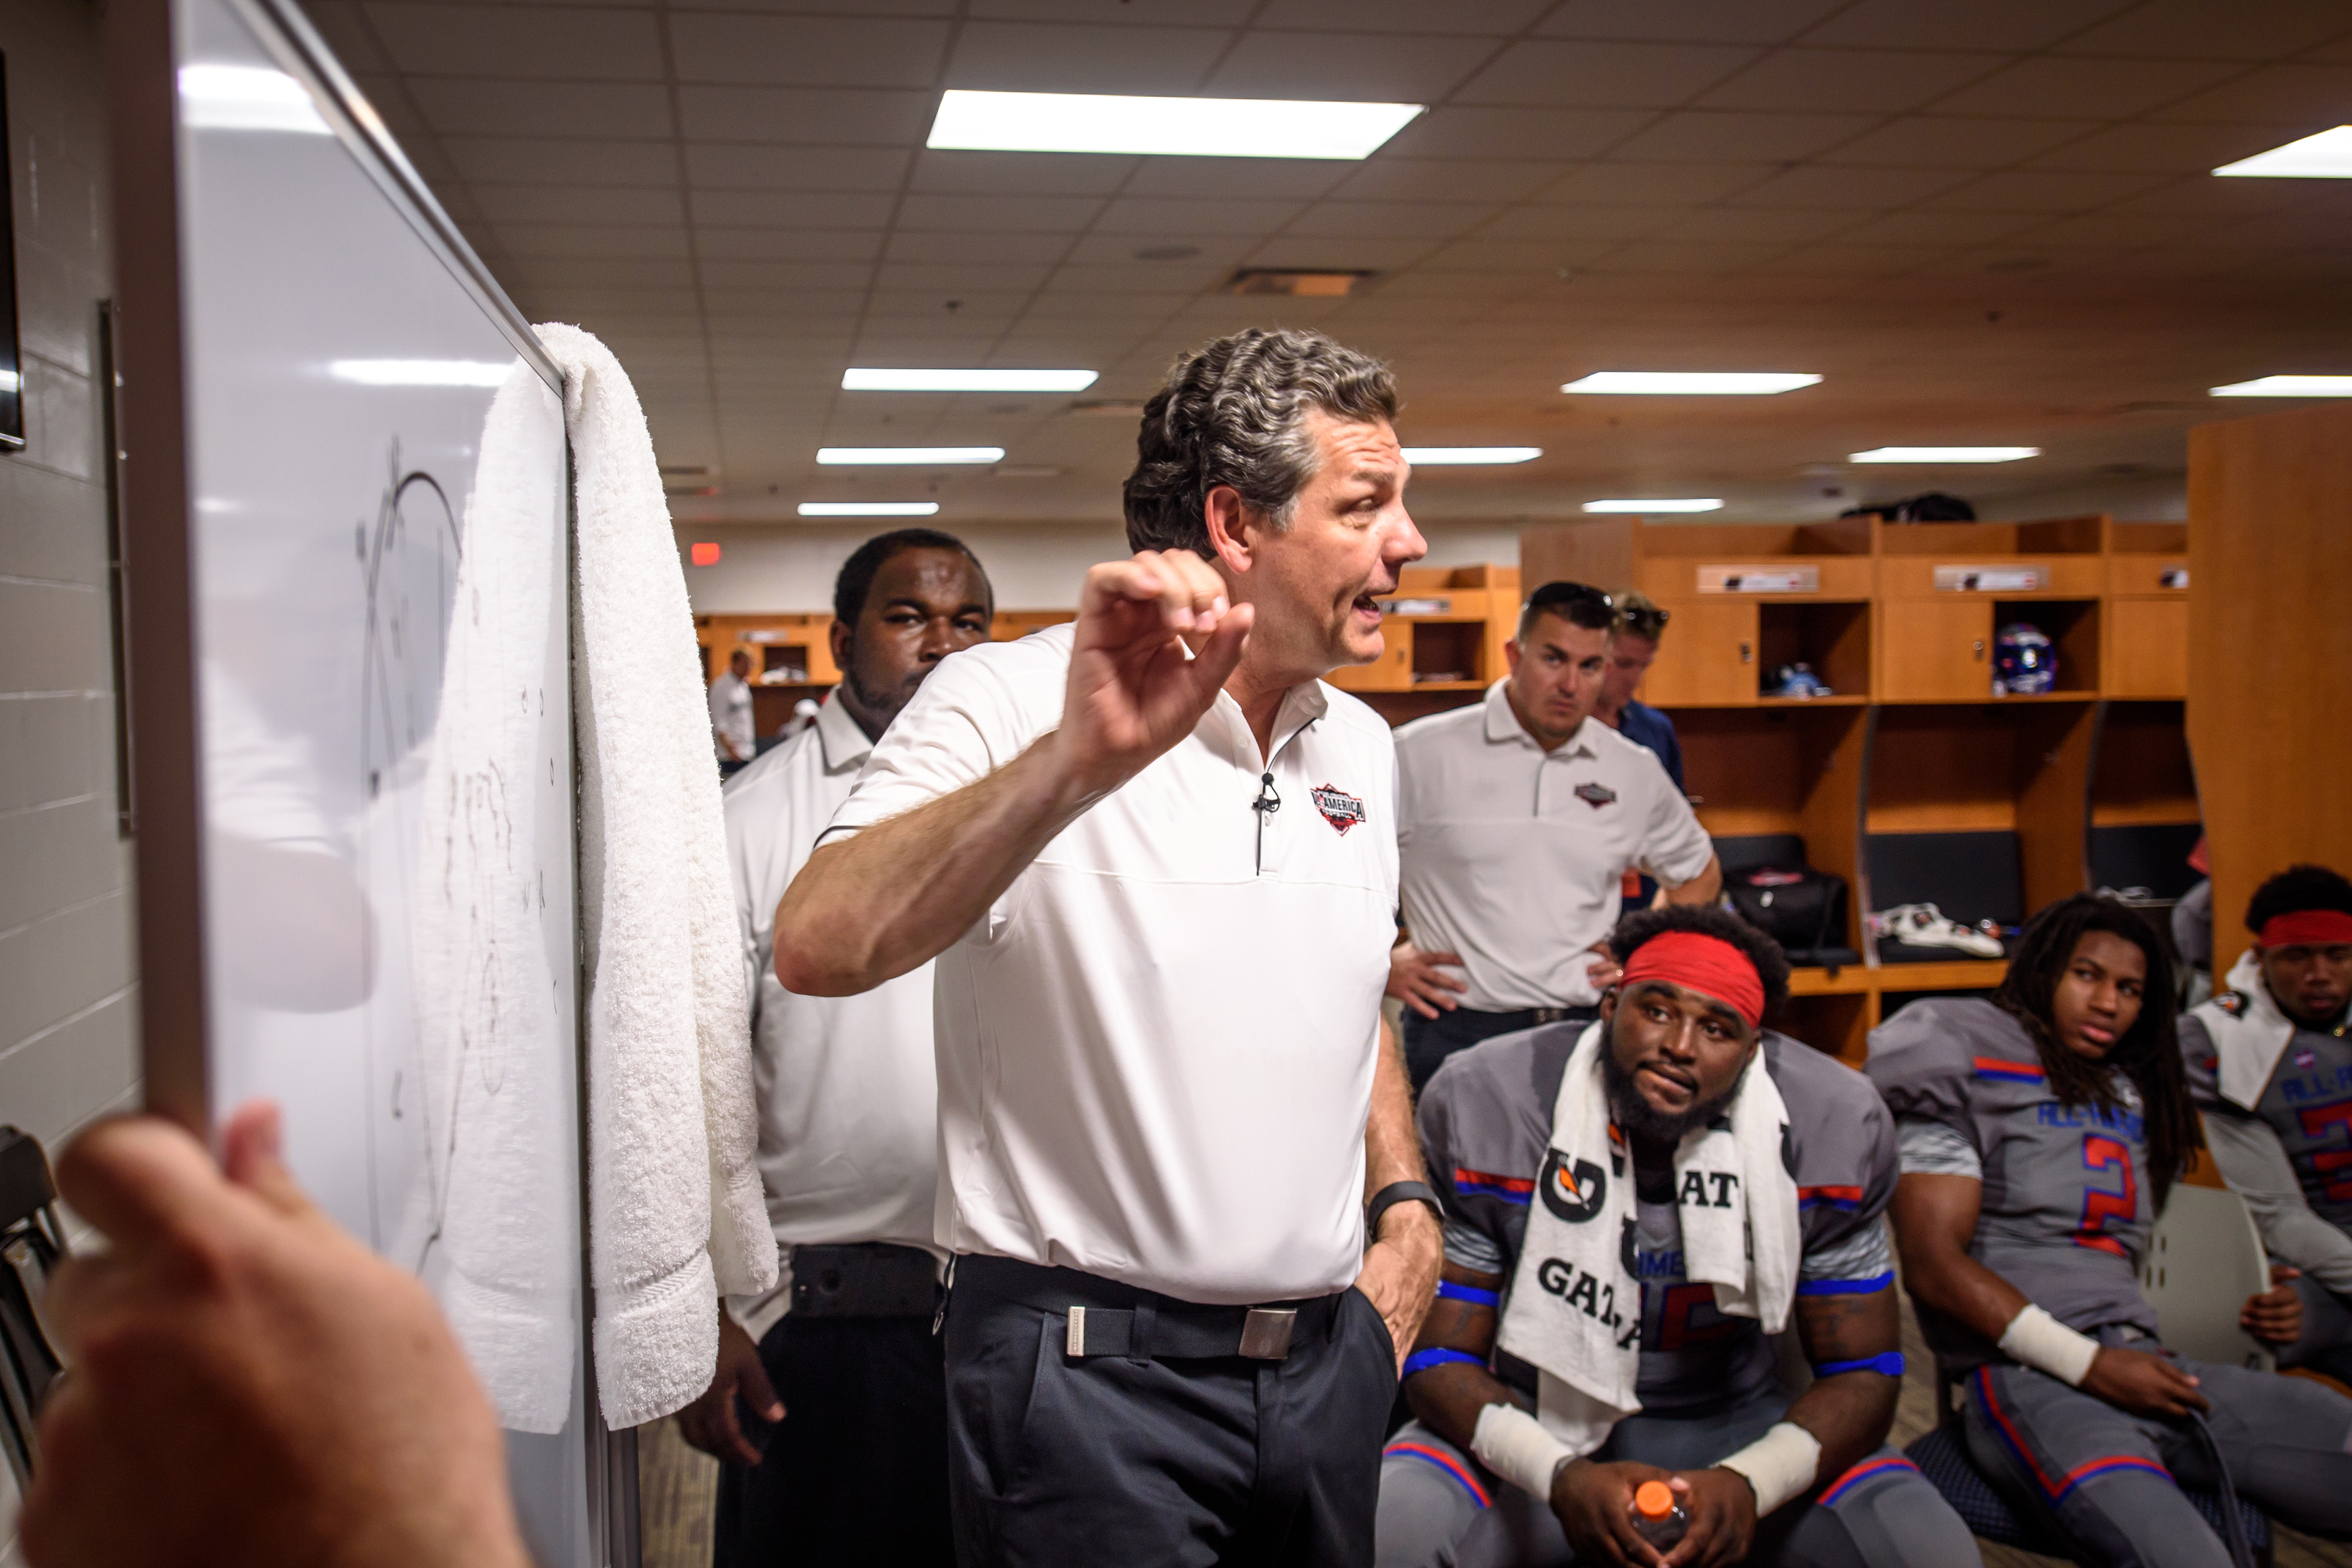 A coach pointing to a drawing board while talking to players in the locker room.